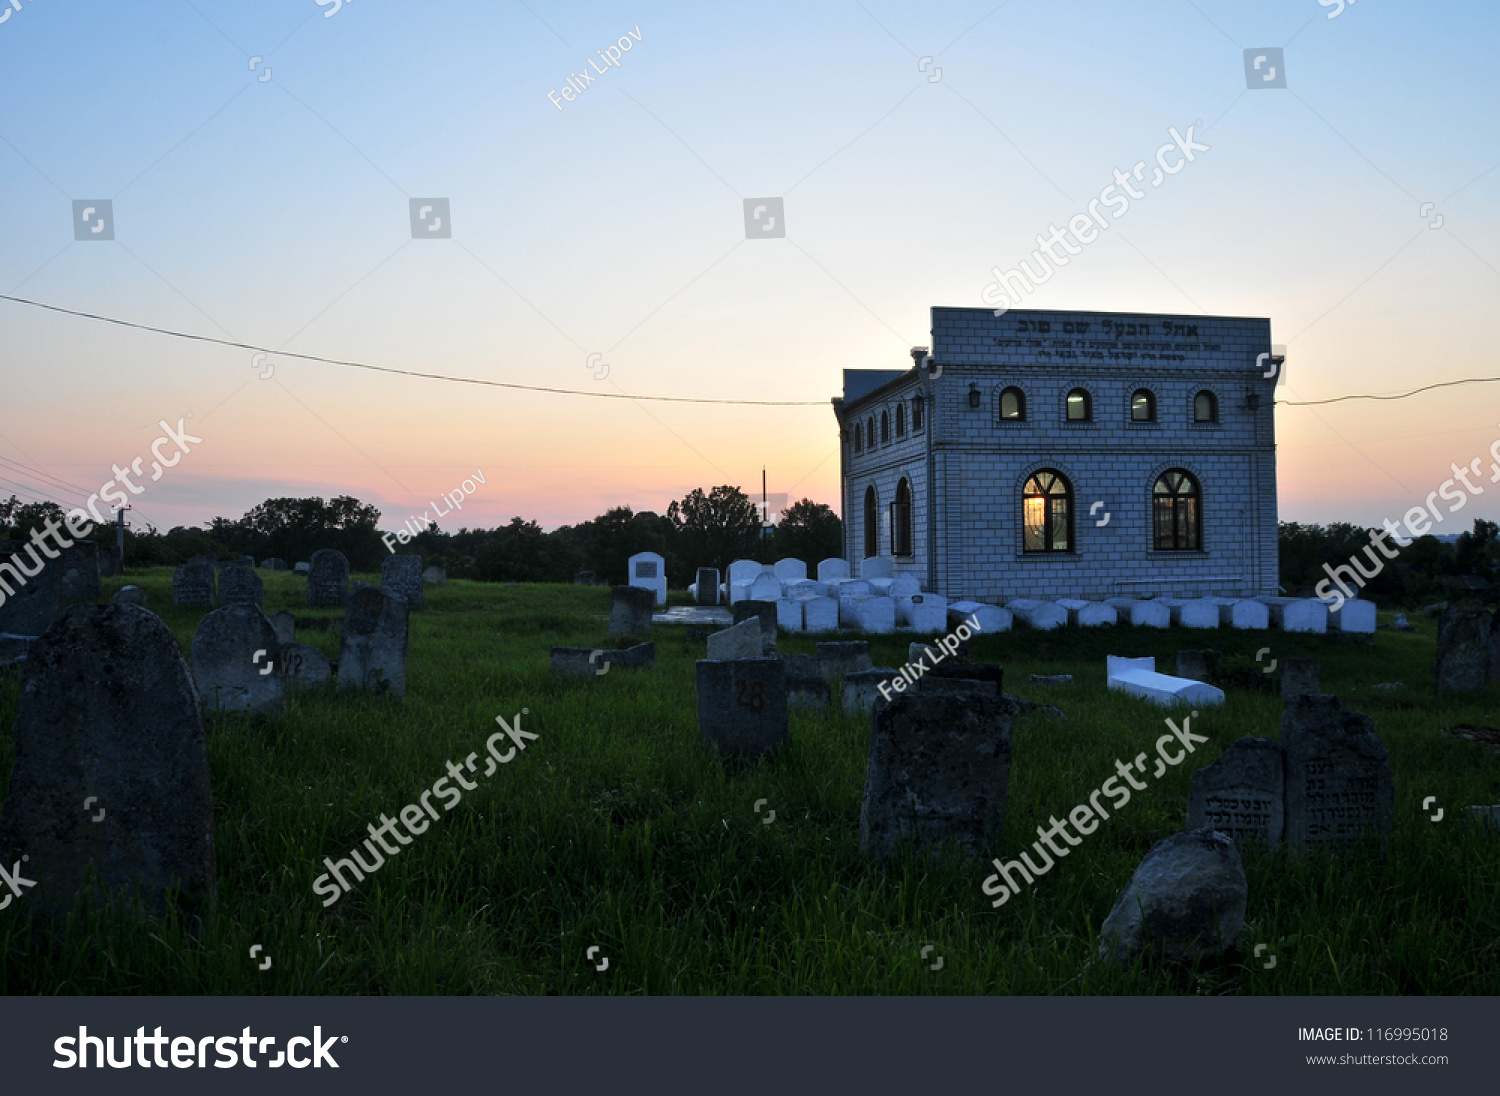 Graveyard of Baal Shem Tov', the founder of the hassidic jewish movement. Located in Medzhybizh, Ukraine. #116995018